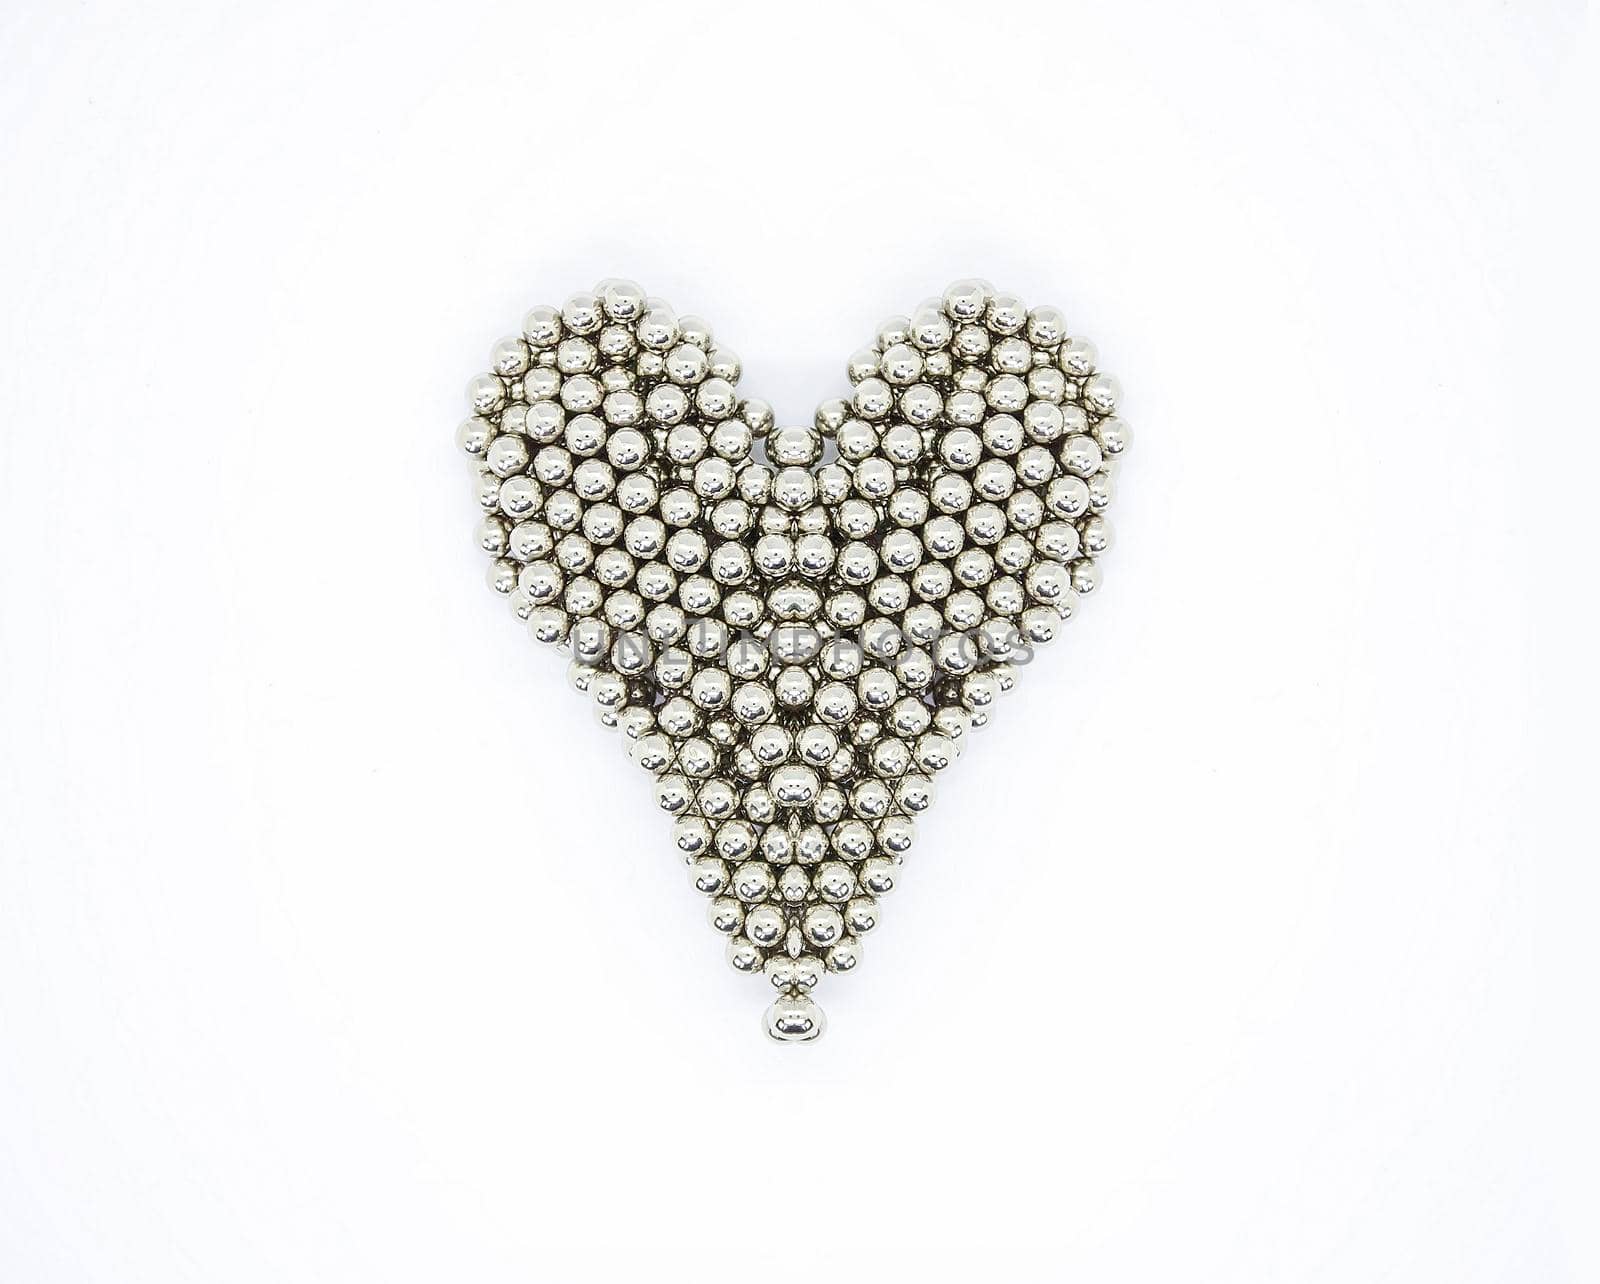 Heart shape made of metal sphere segments on white background.